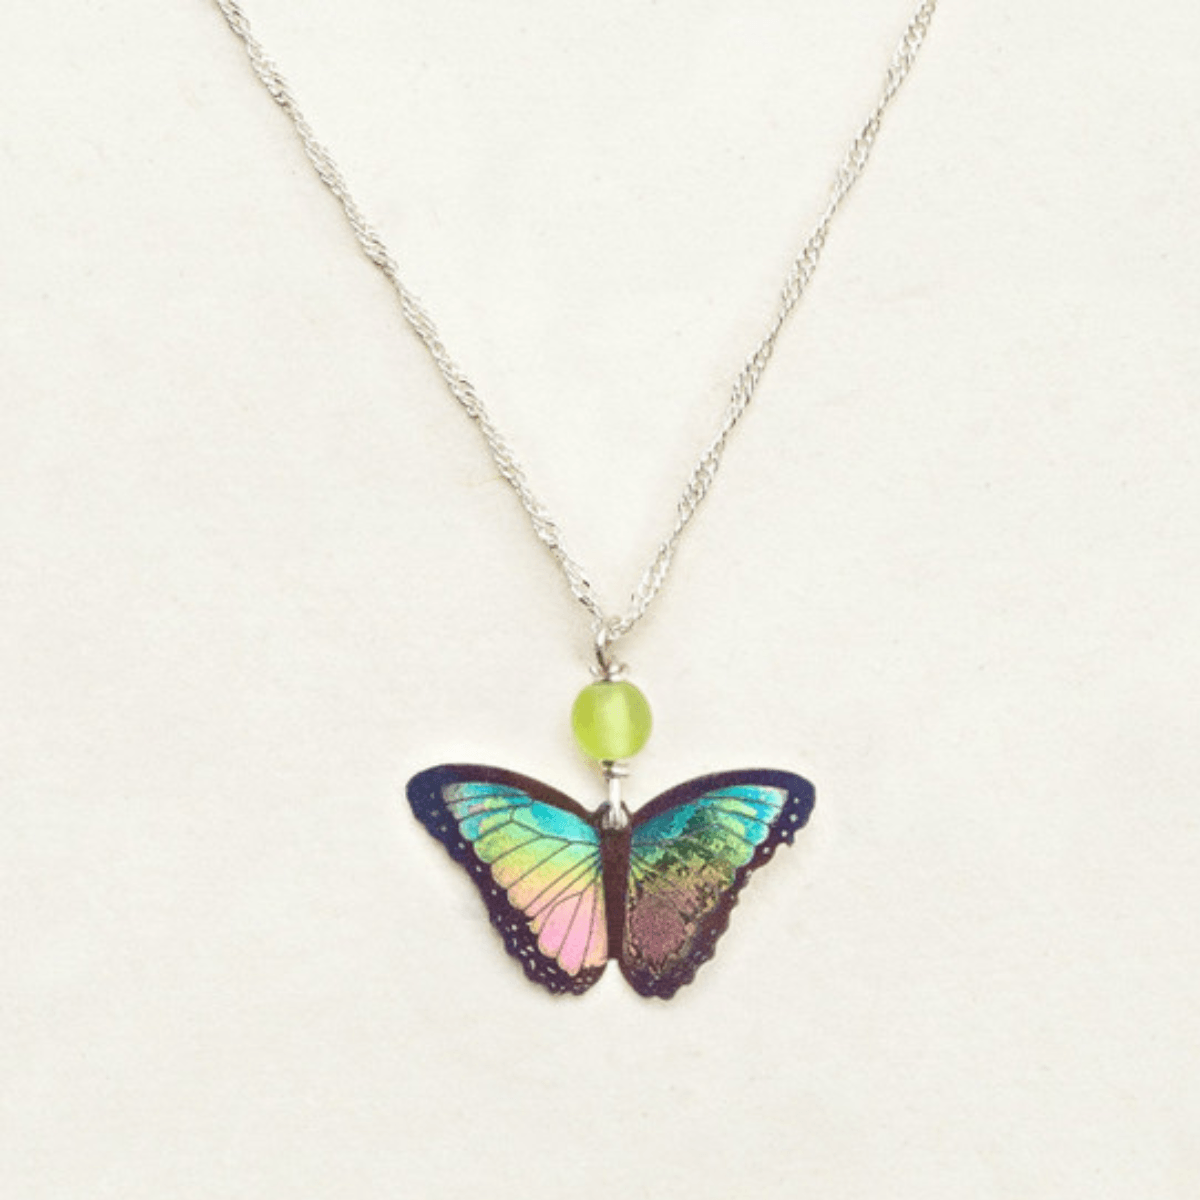 Holly Yashi Bella Butterfly Necklace - Silver Parrot, Inc. 